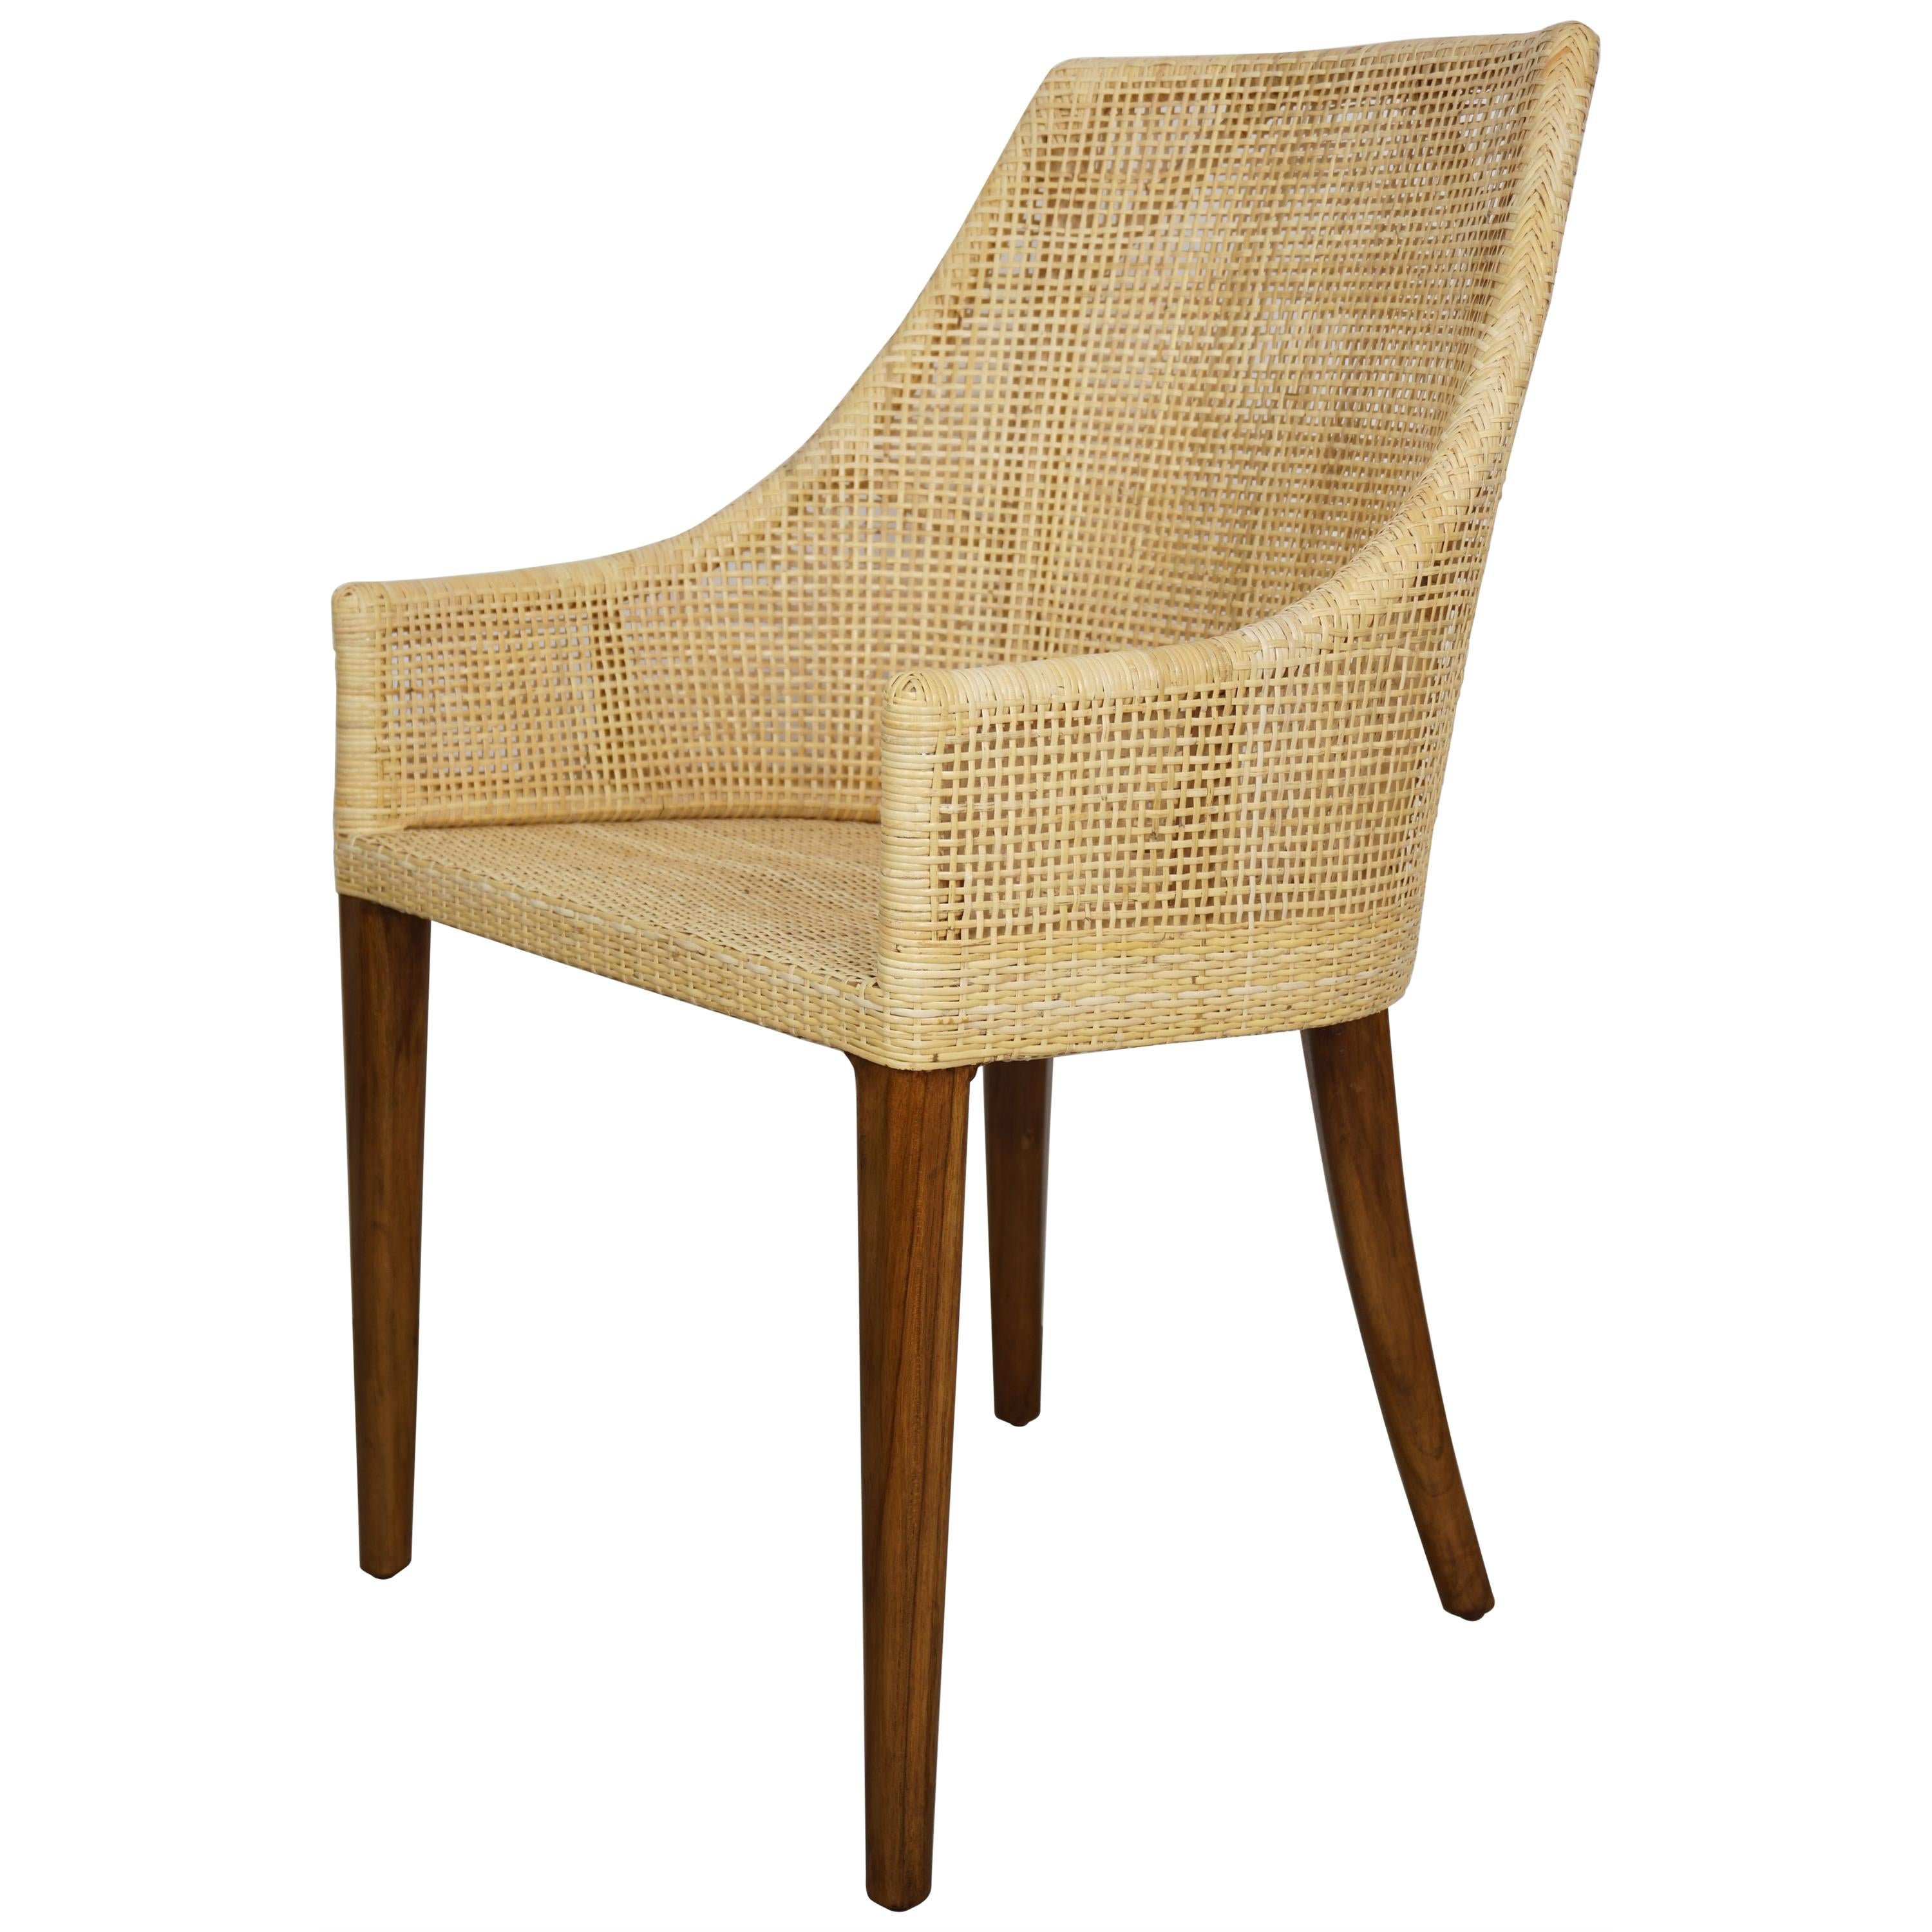 Handmade Braided Cane Rattan and Solid Wood Chair